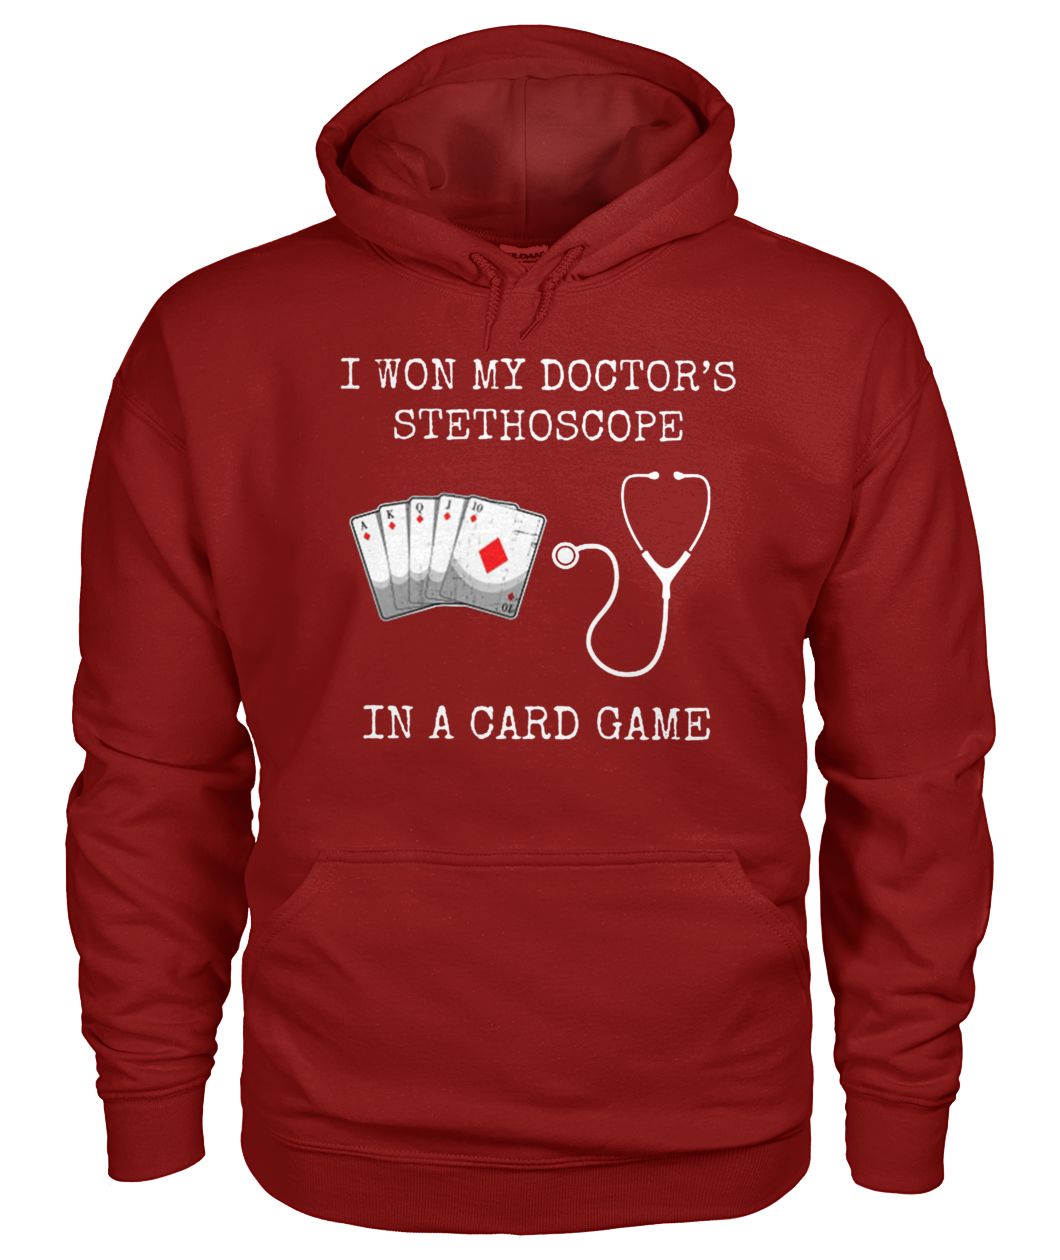 I won my doctor's stethoscope in a card game nurse playing cards gildan hoodie